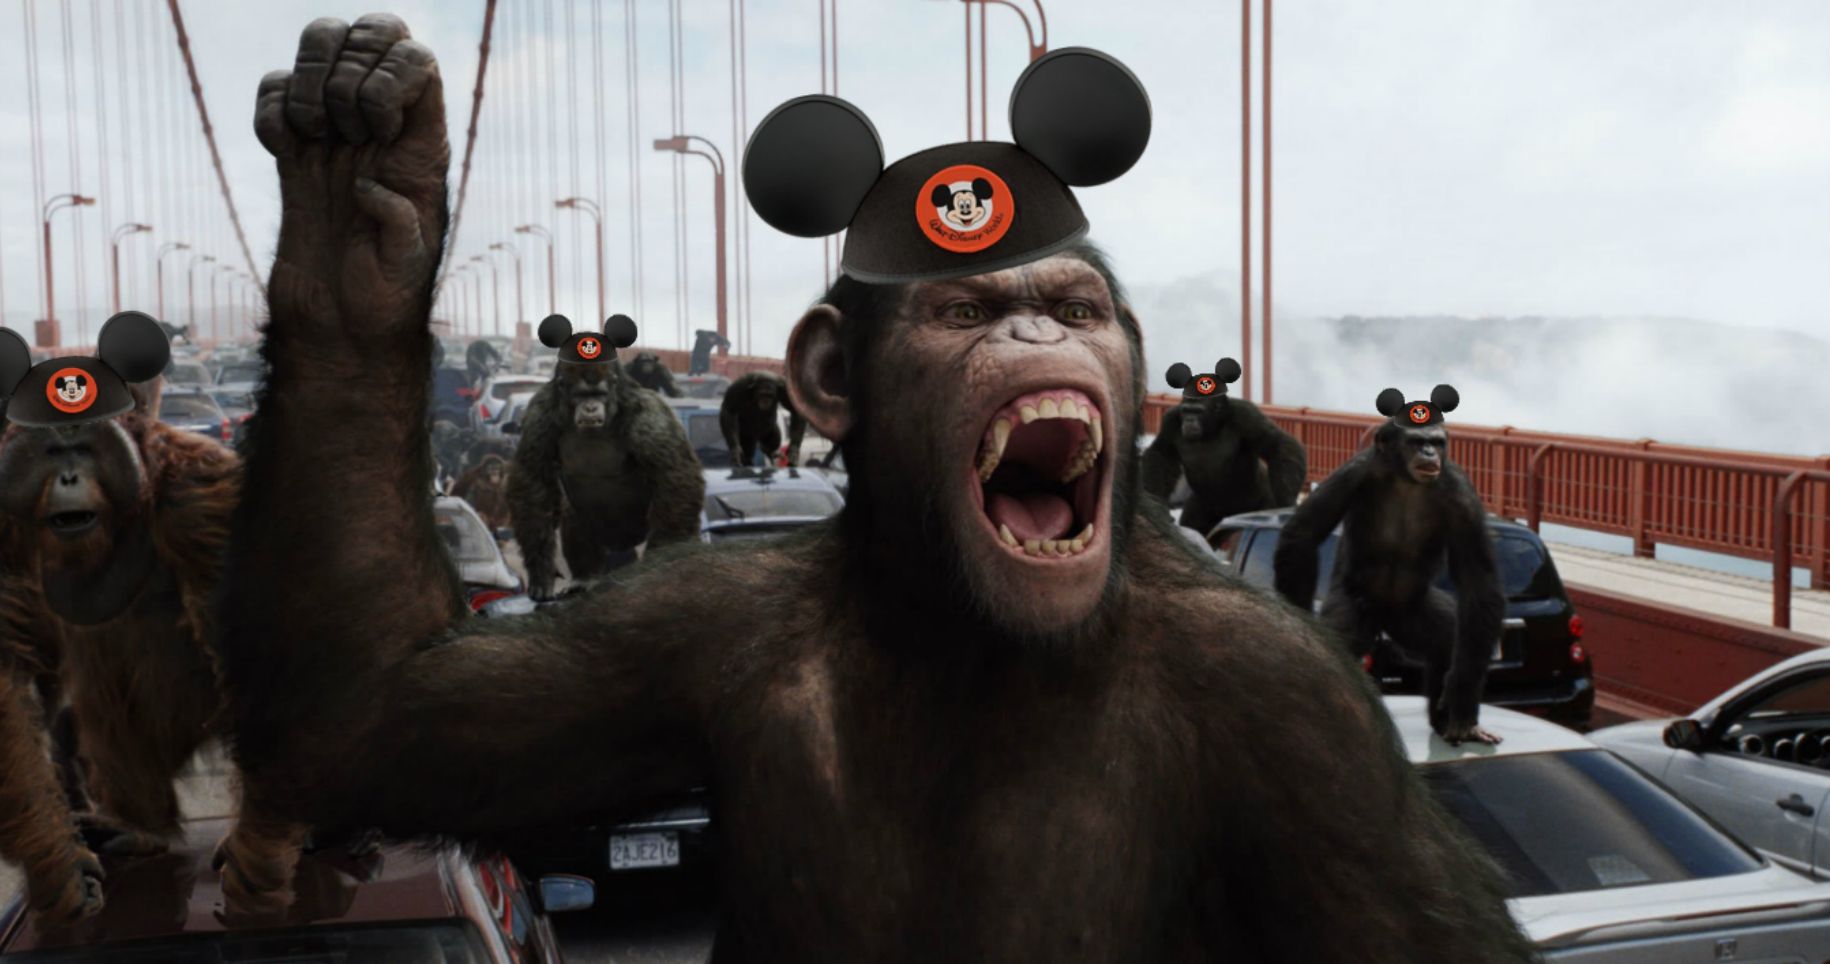 Planet of the Apes Fans Are Divided Over Disney's Reboot